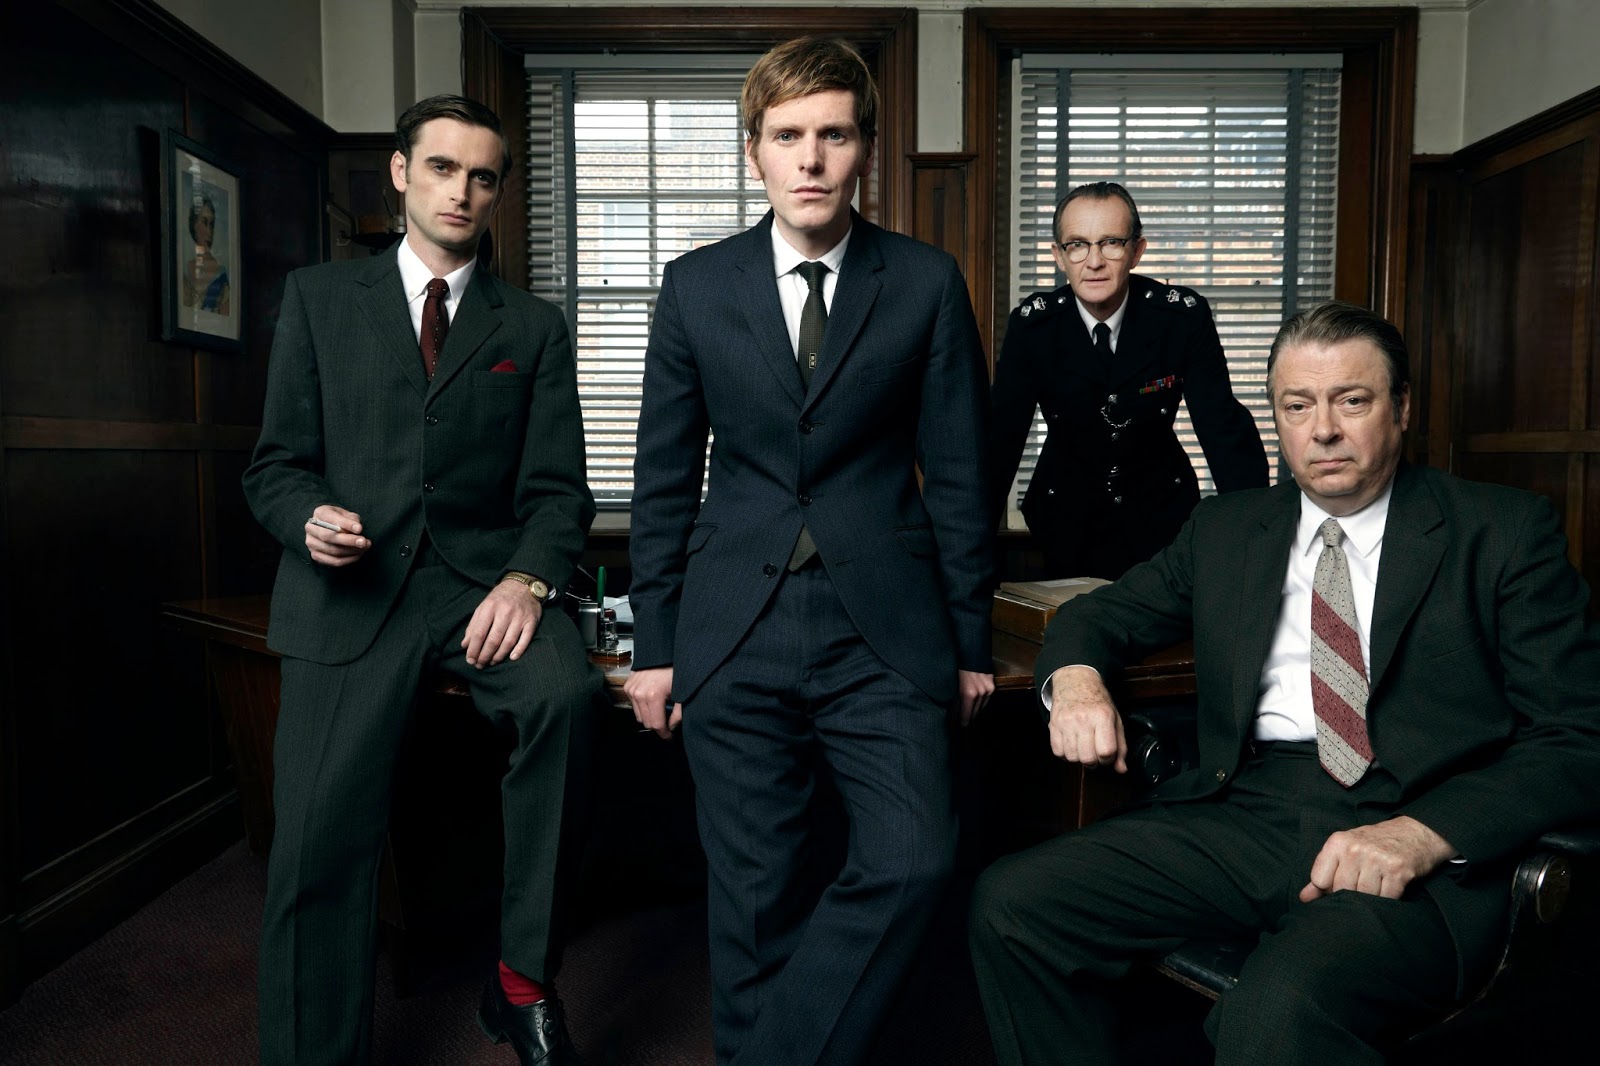 The Custard TV: More on the return of Endeavour from ITV